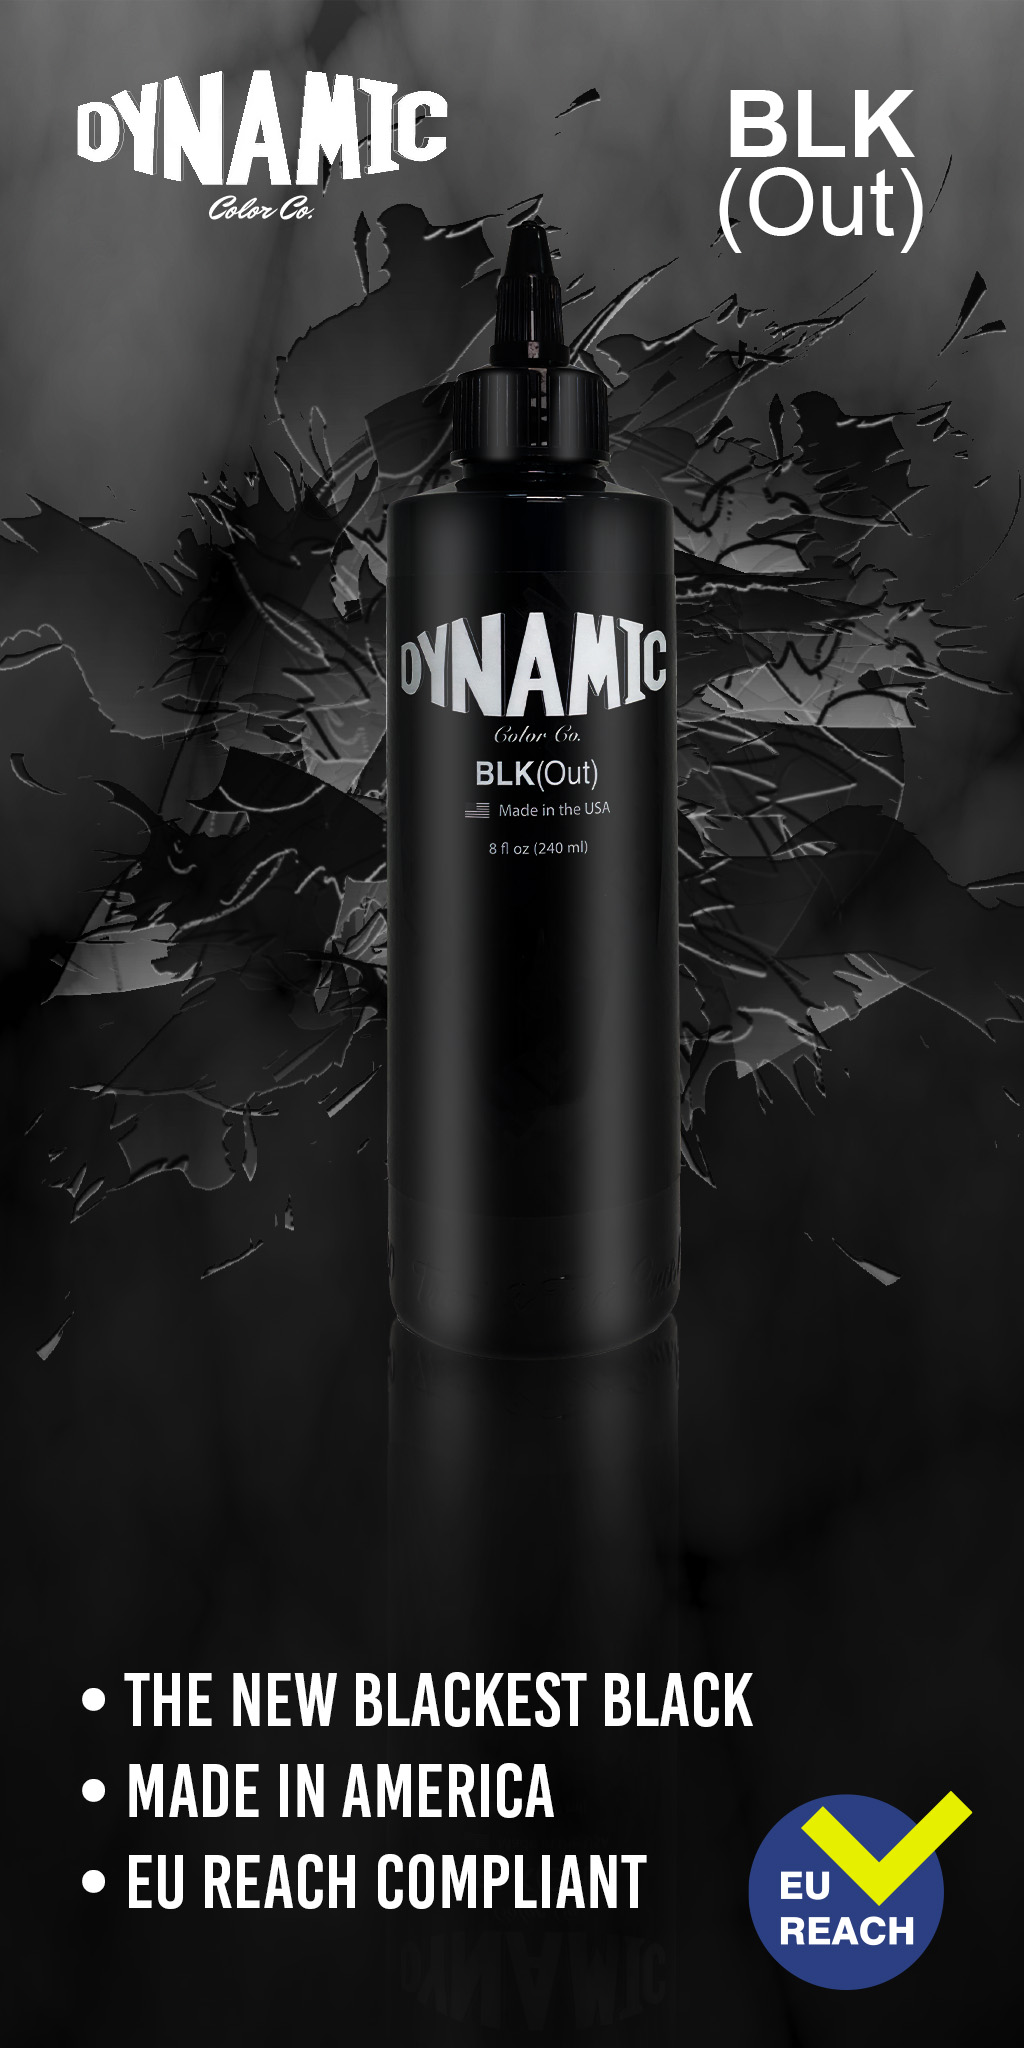 Dynamic Ink BLK OUT - High-quality, deep black vegan tattoo ink for rich, long-lasting results. Perfect for outlines and shading.